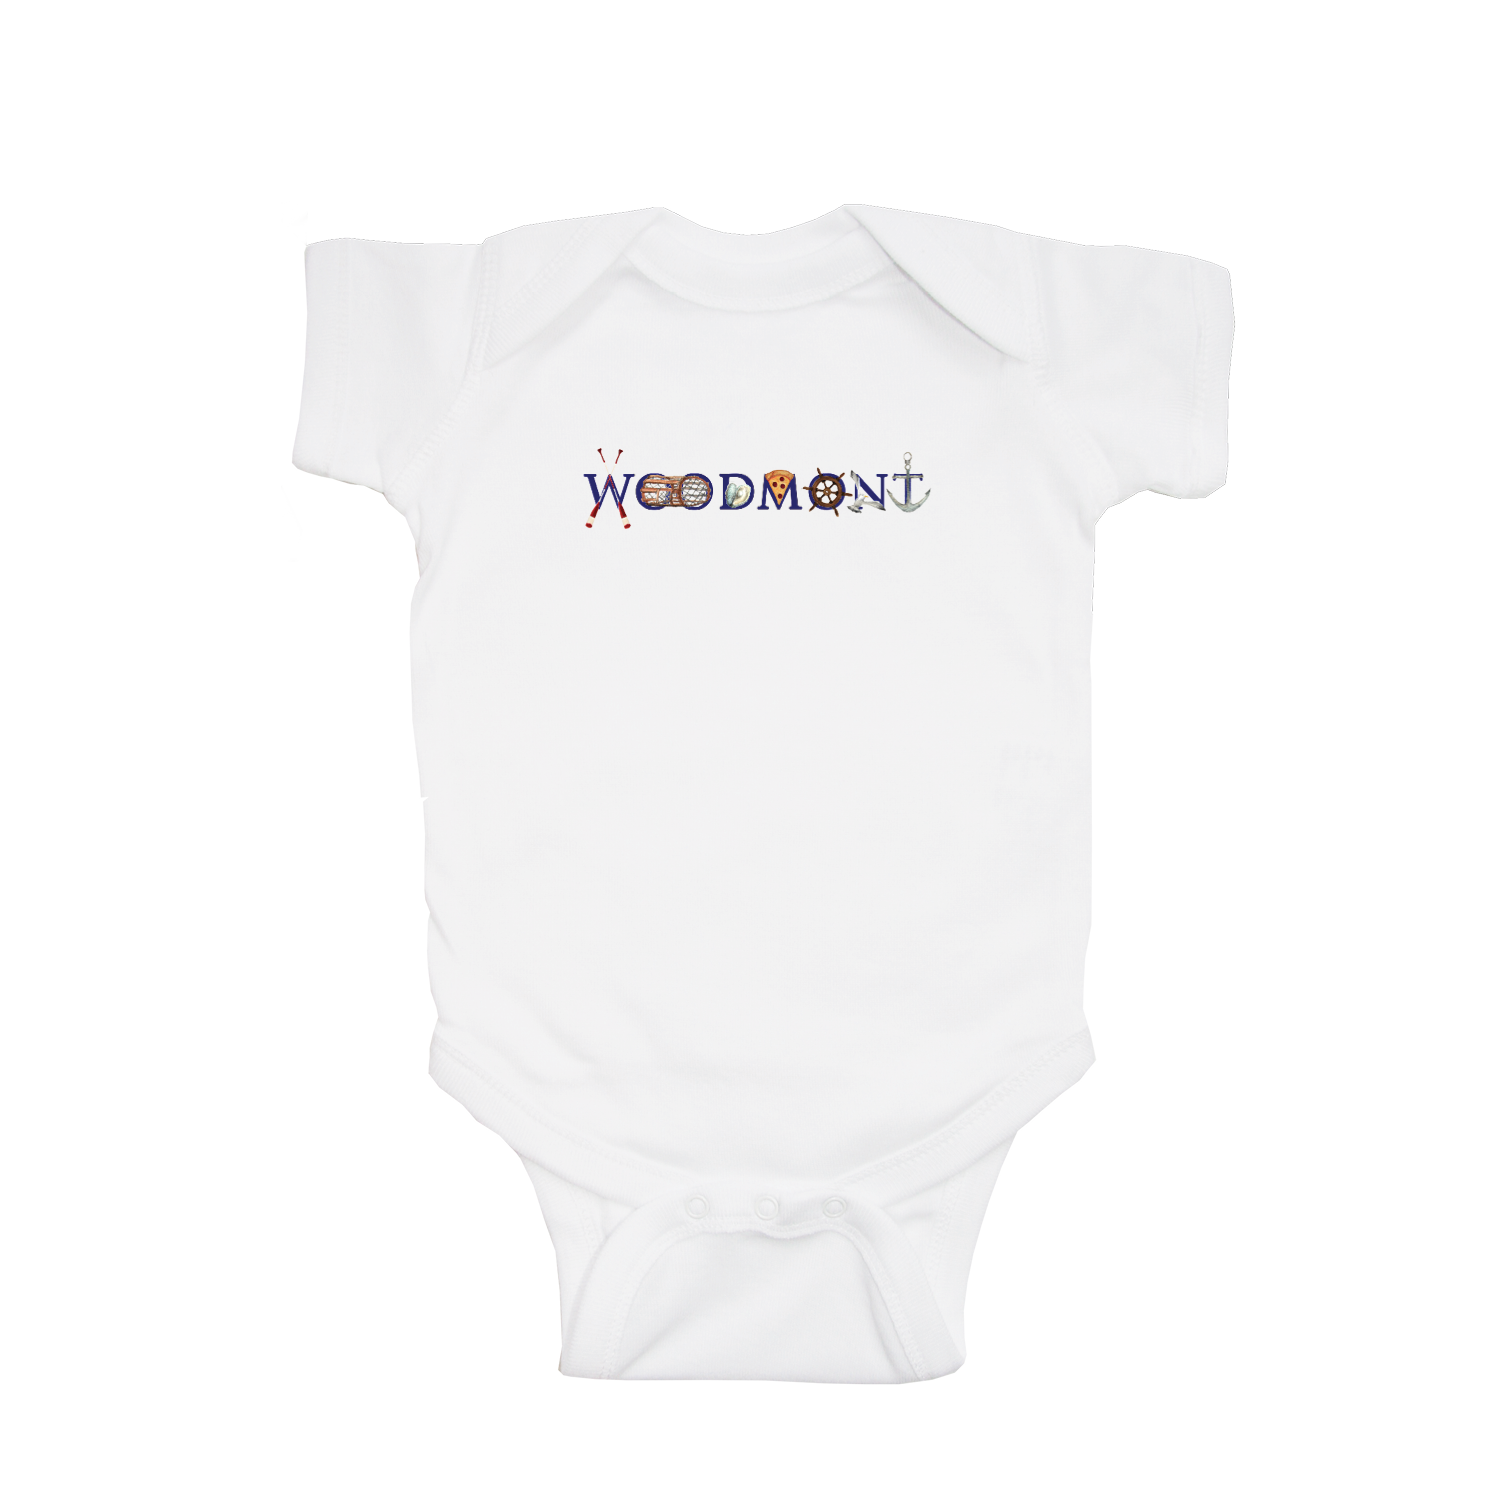 woodmont baby snap up short sleeve